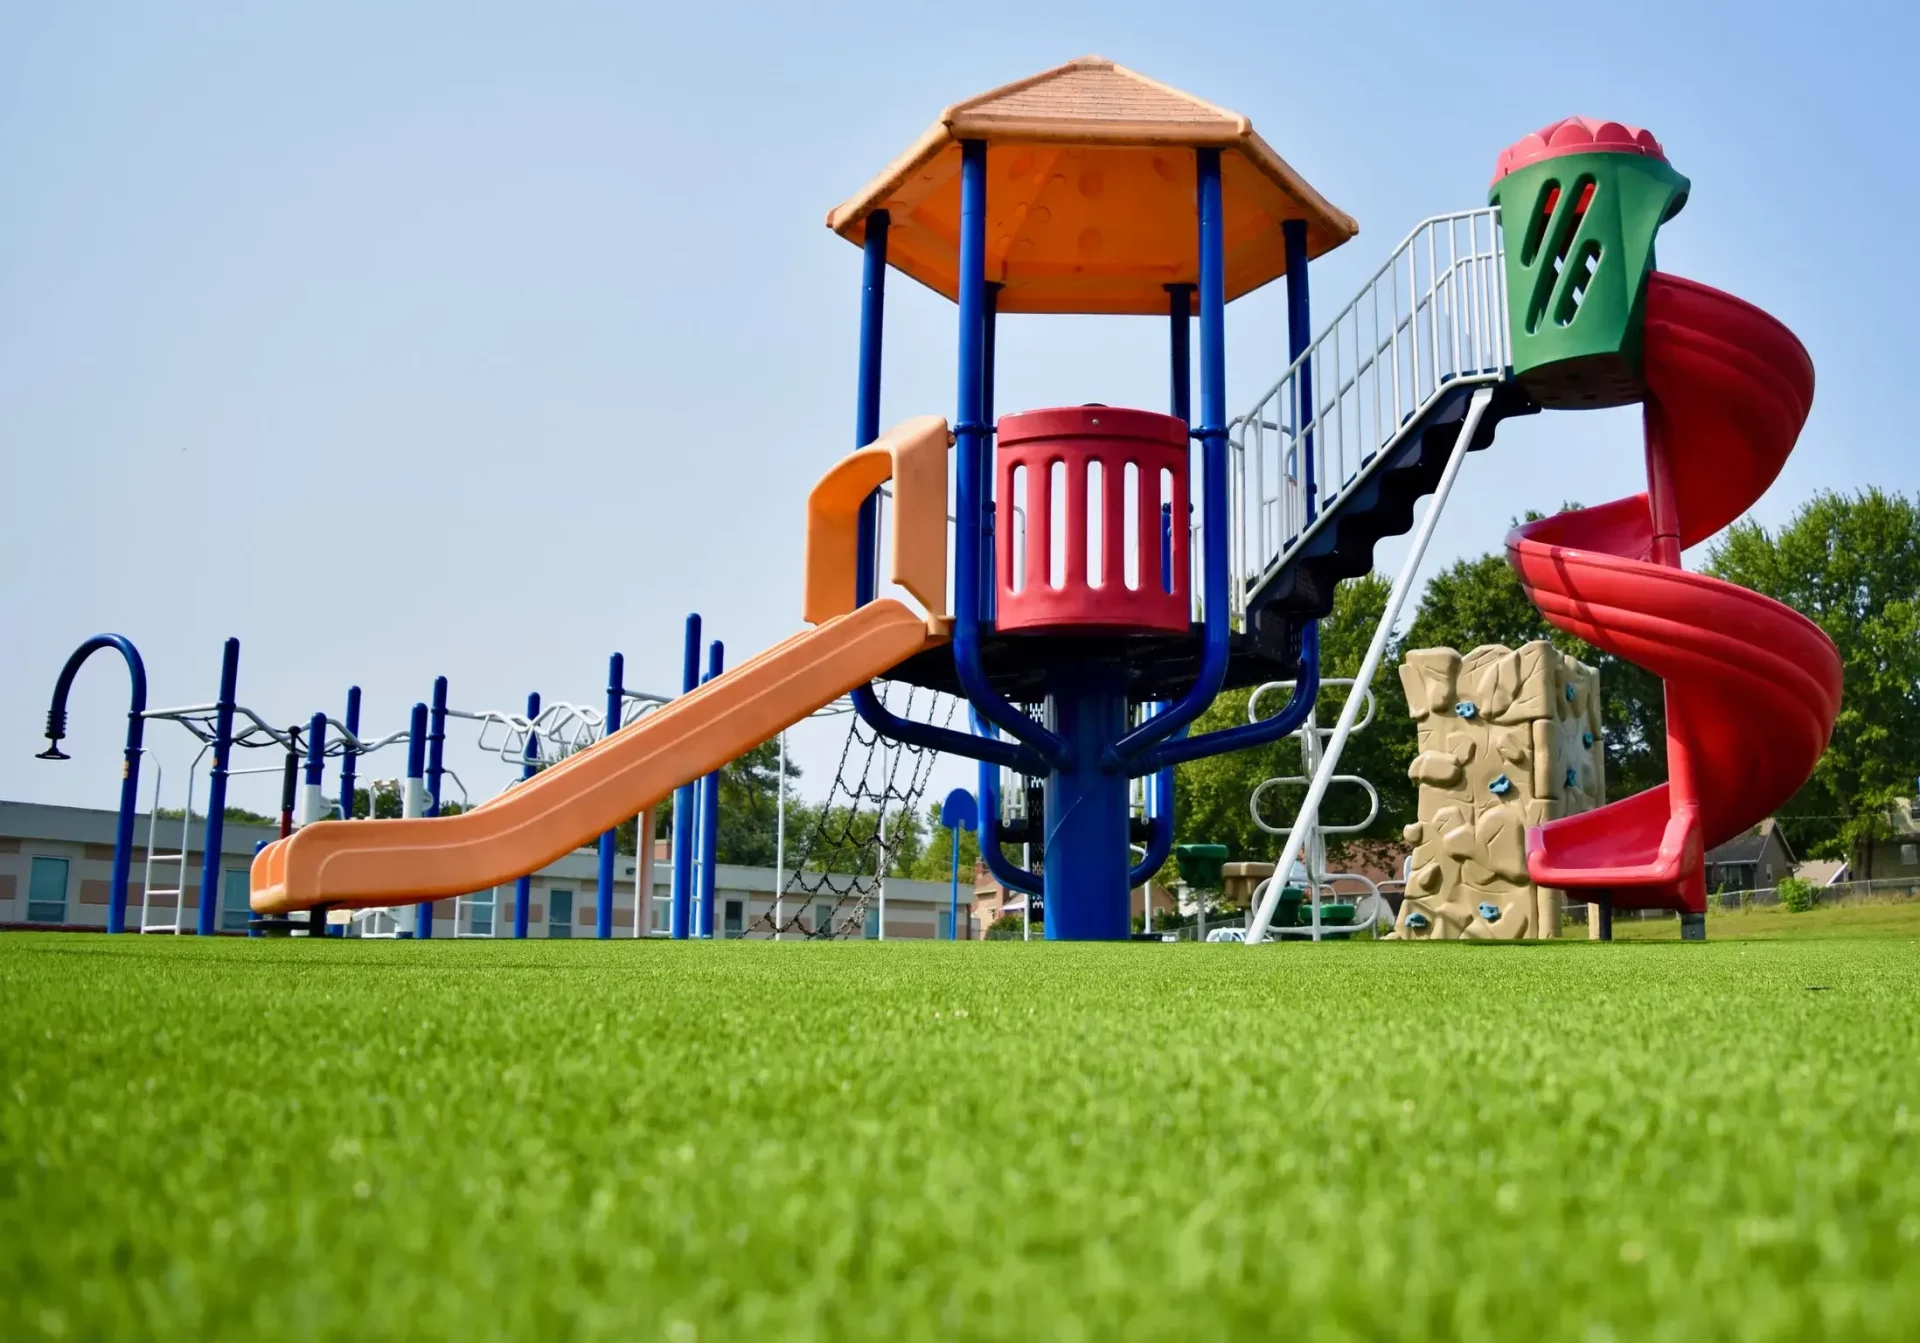 Ground view of artificial playground grass with jungle gym